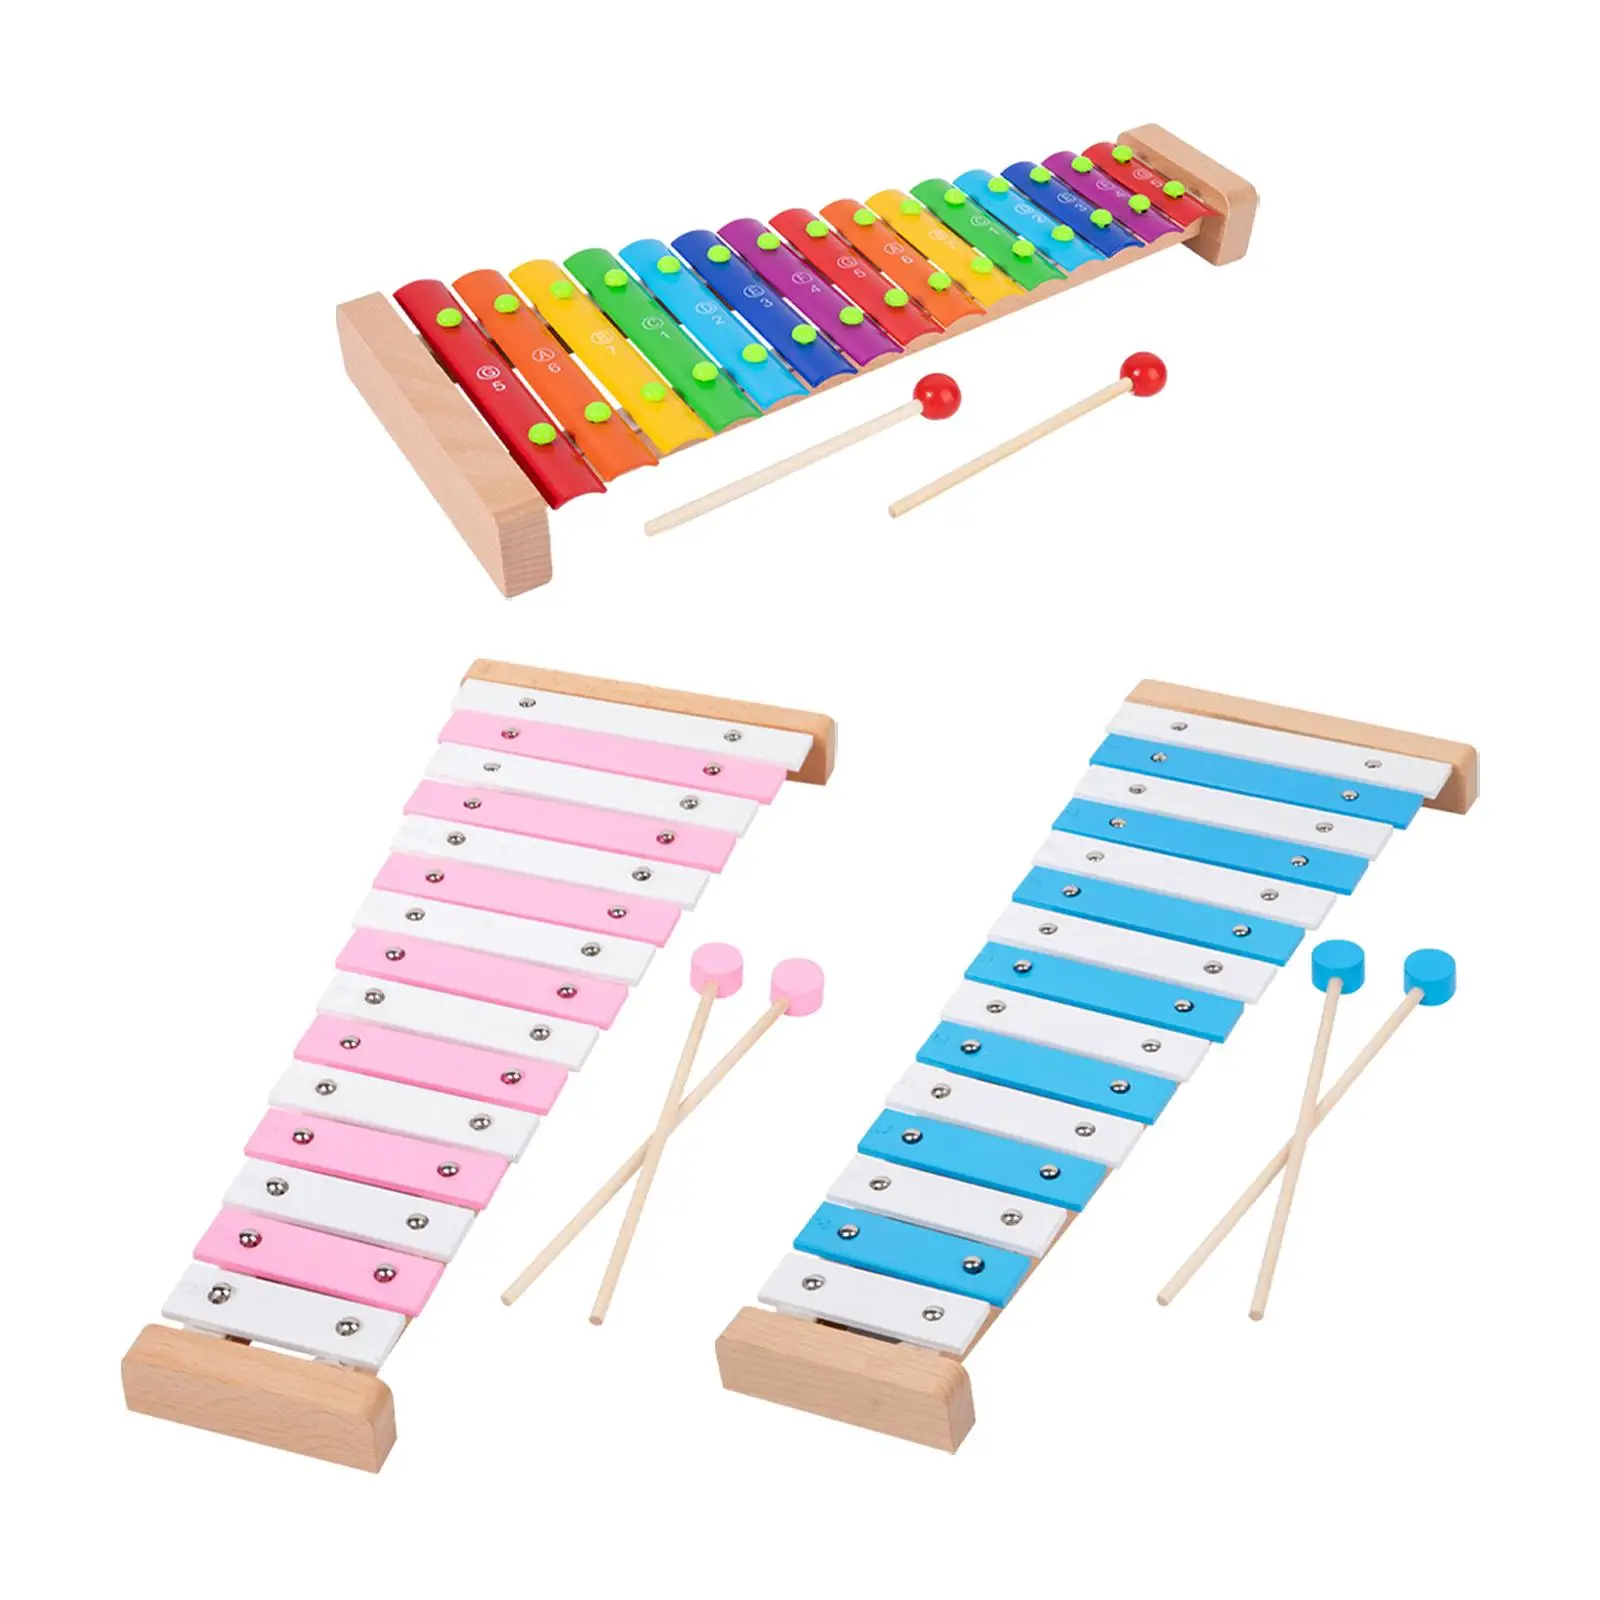 15 Note Metal Xylophone with 2 Mallets Musical Toy for Players Kids